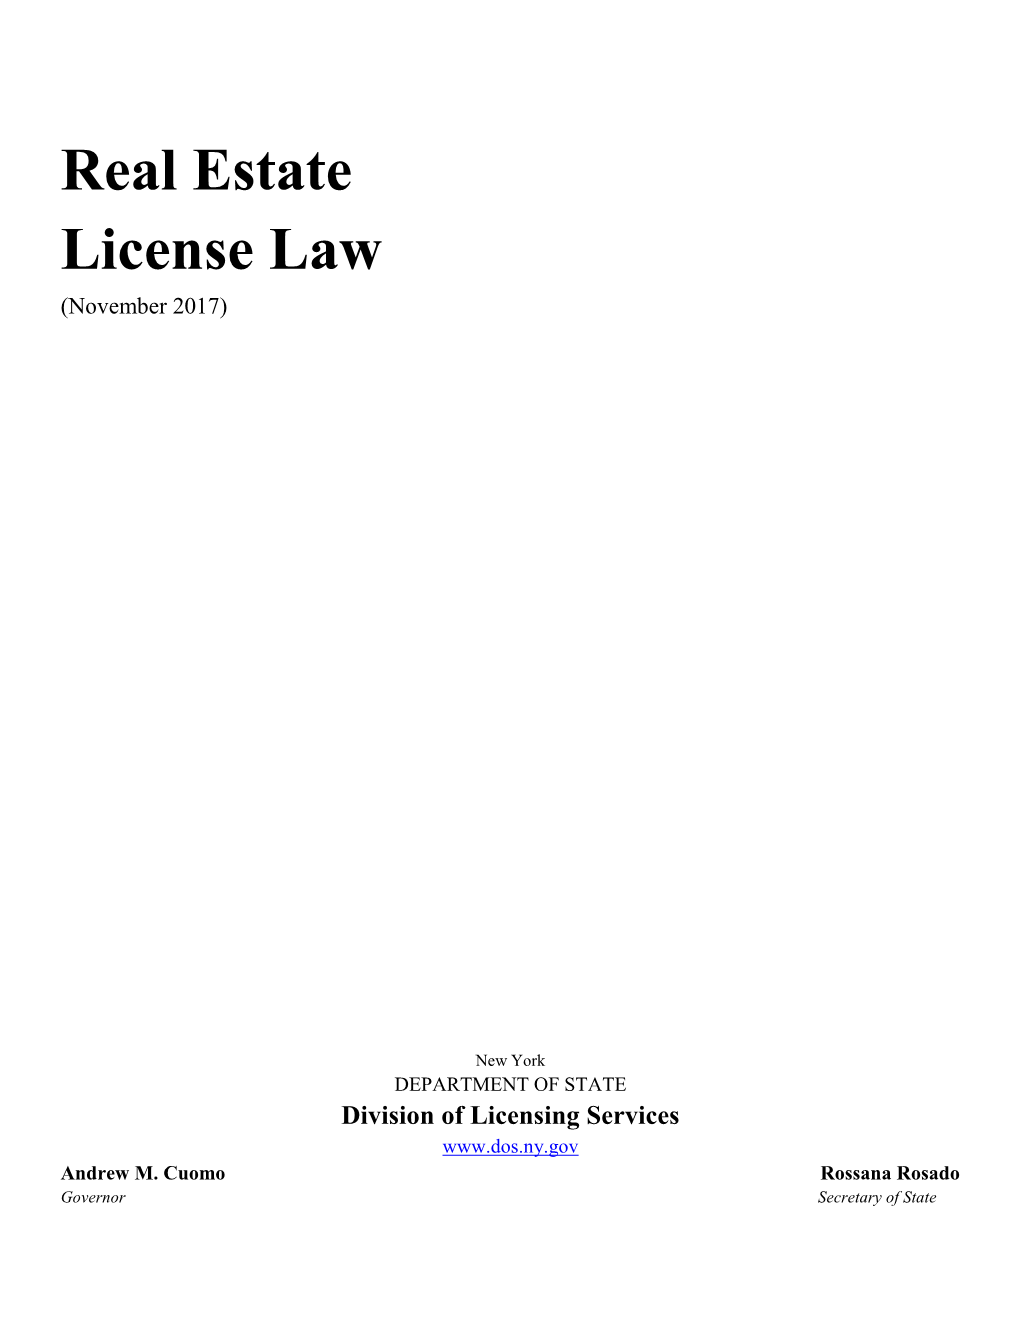 NYS Real Estate License